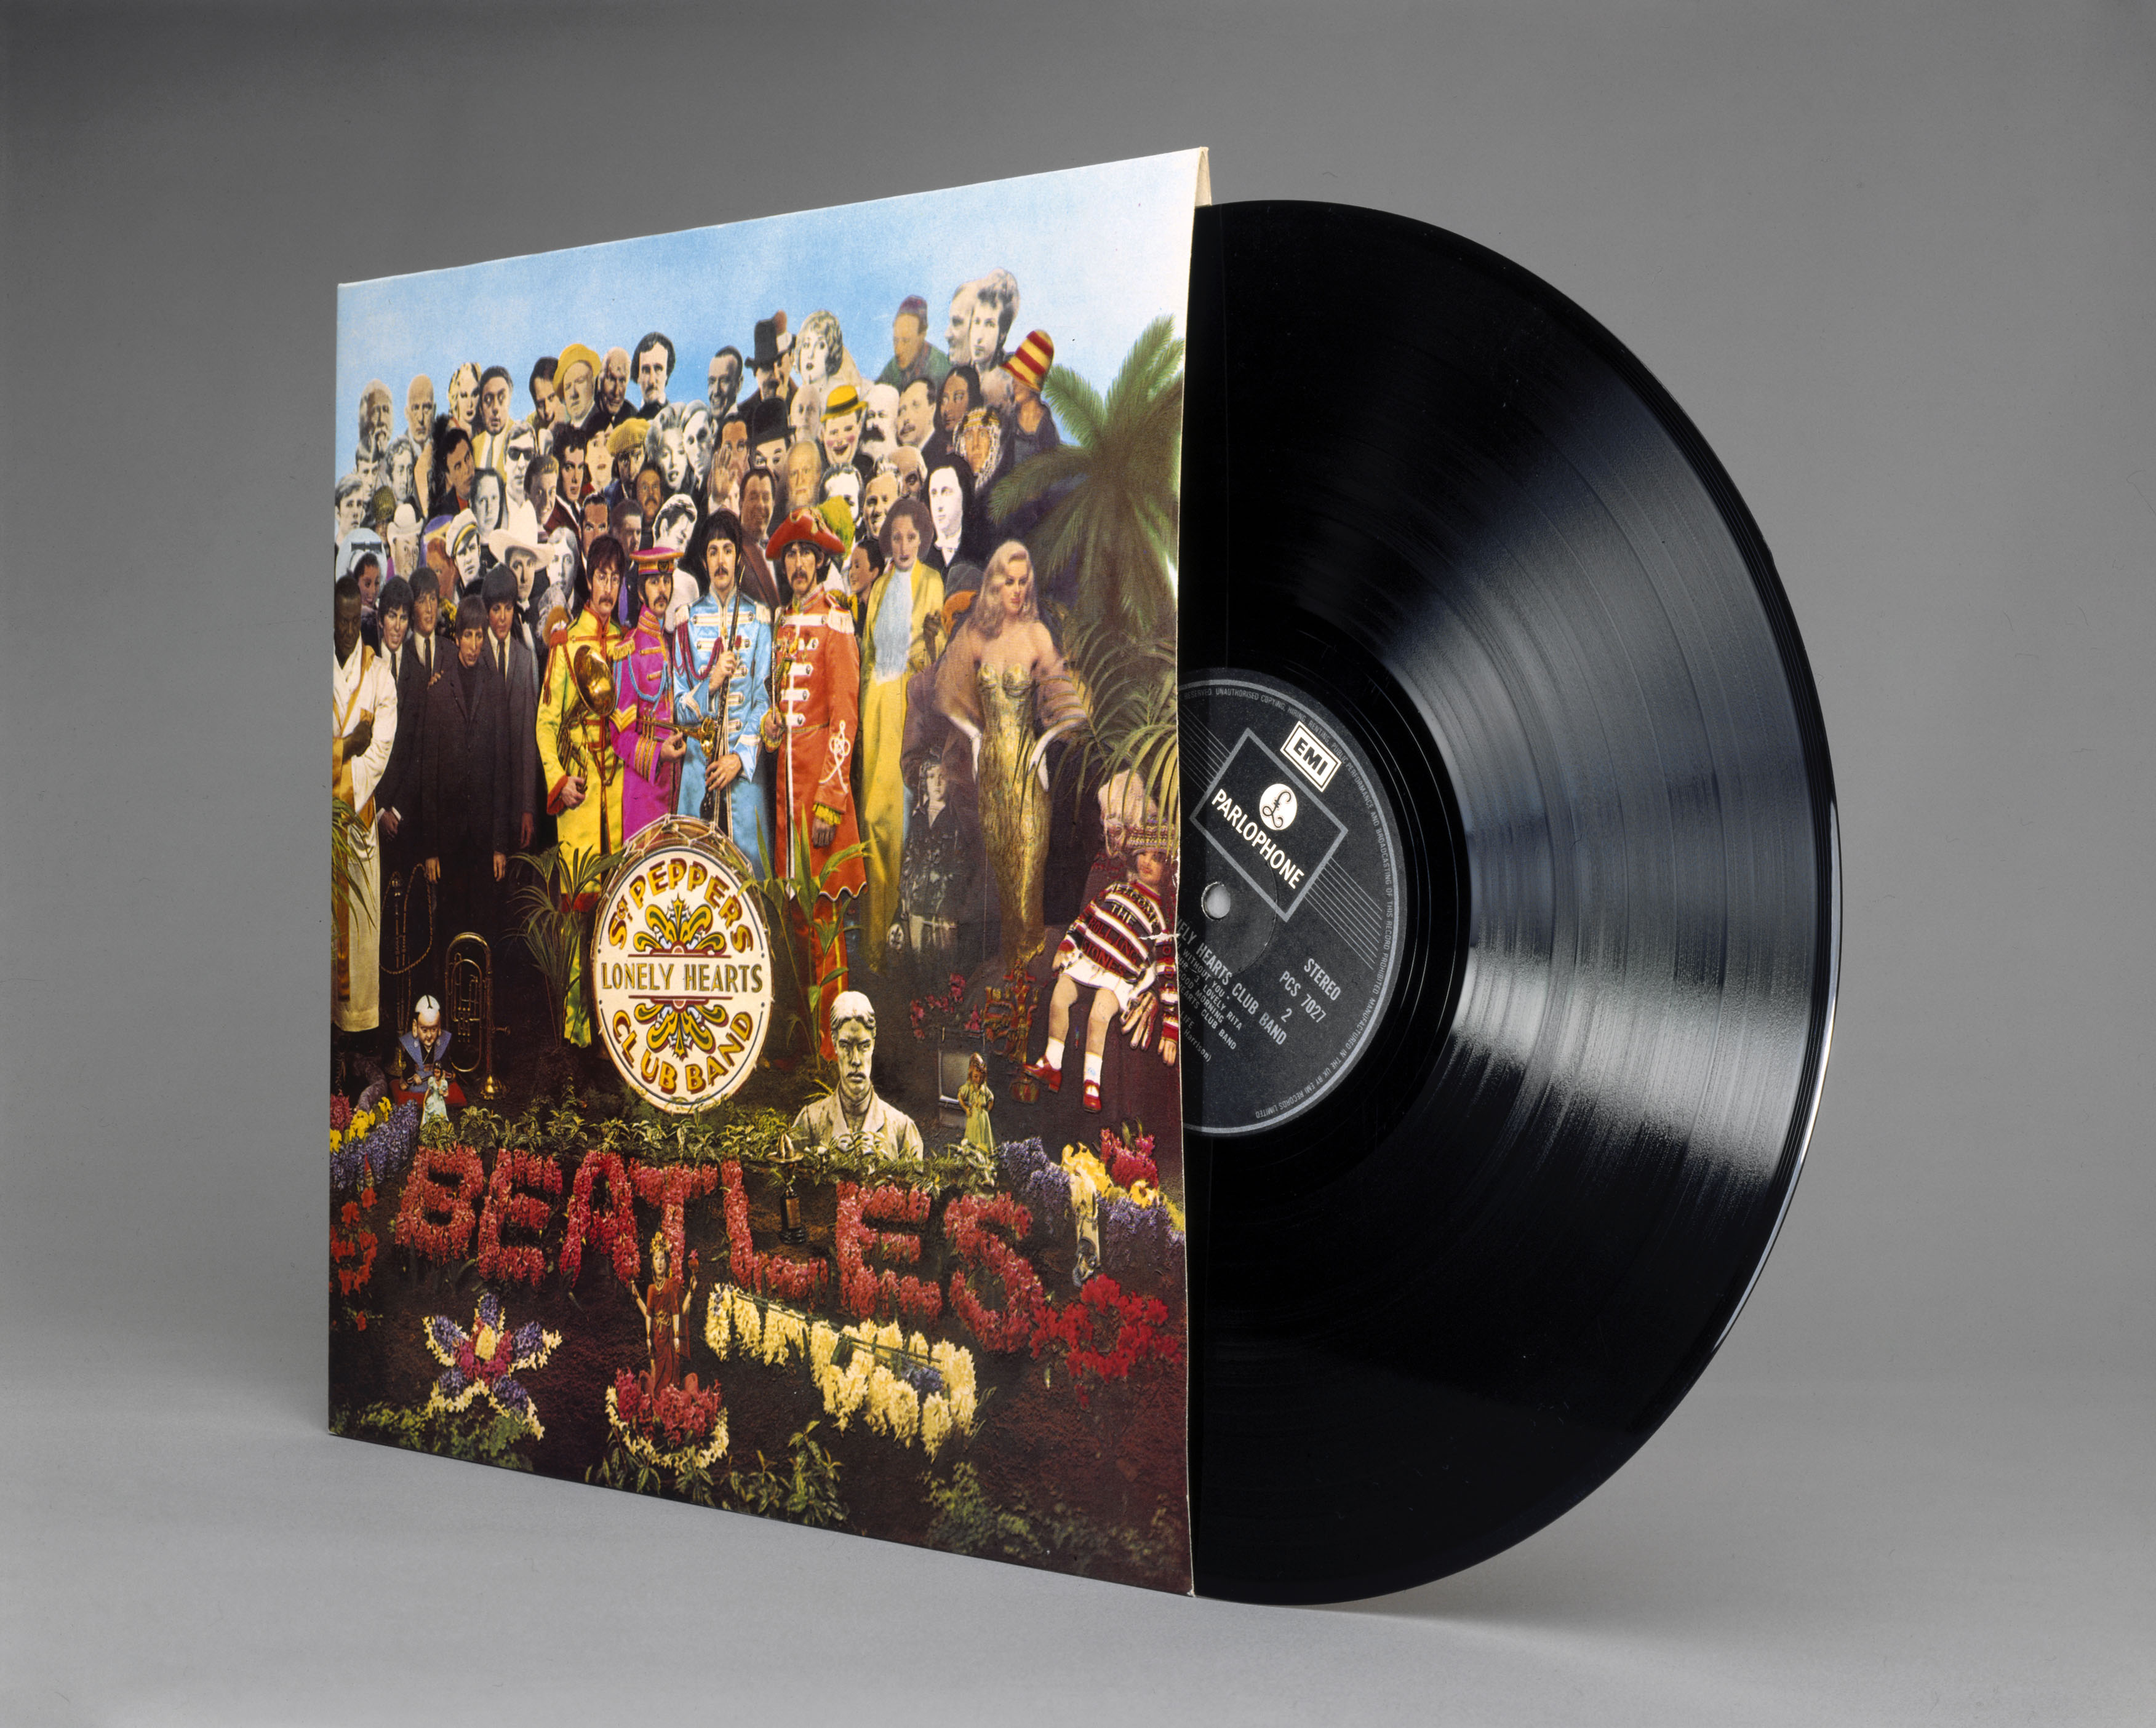 A vinyl of Sgt. Pepper's Lonely Hearts Club Band partially out of its sleeve